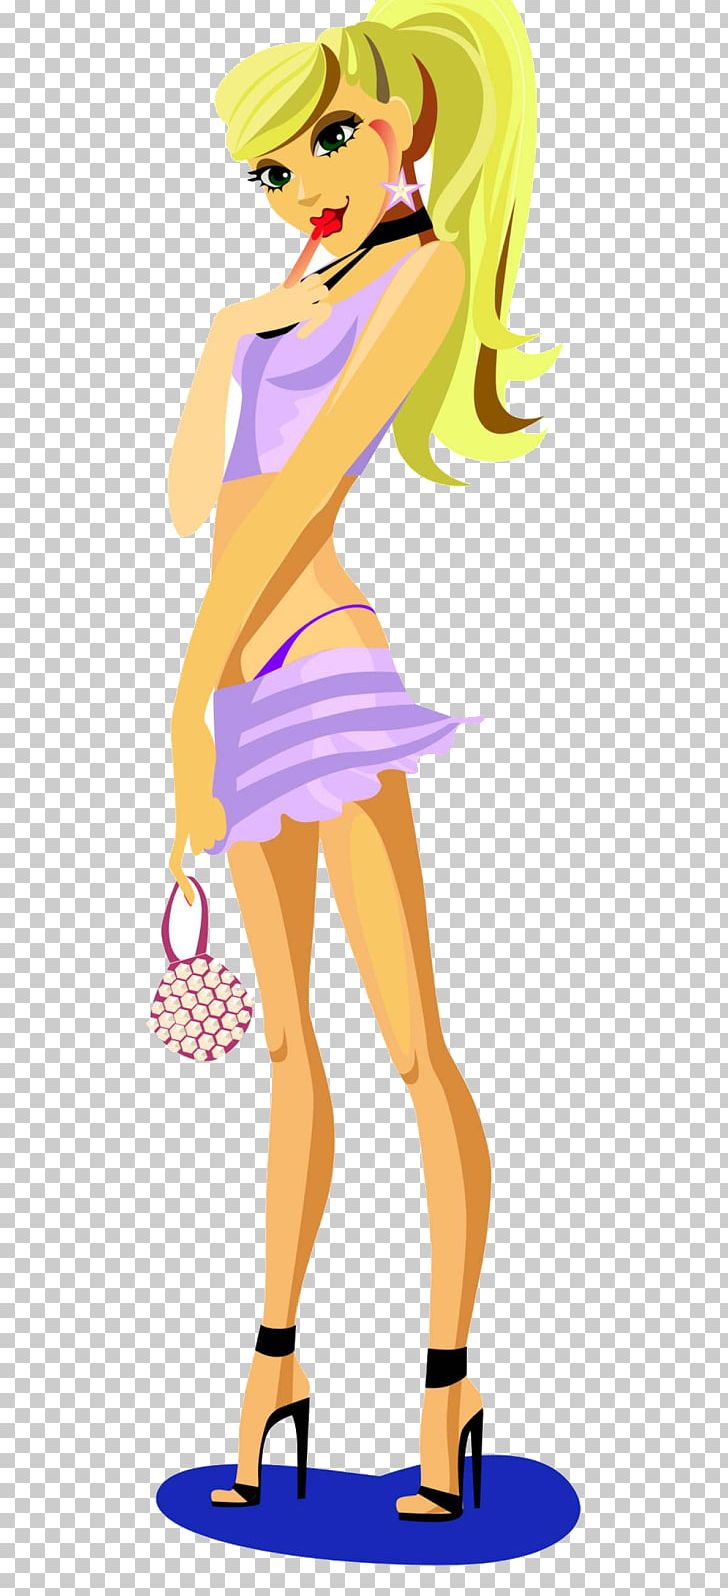 Cartoon Fashion PNG, Clipart, Anime, Arm, Art, Artwork, Celebrities Free PNG Download